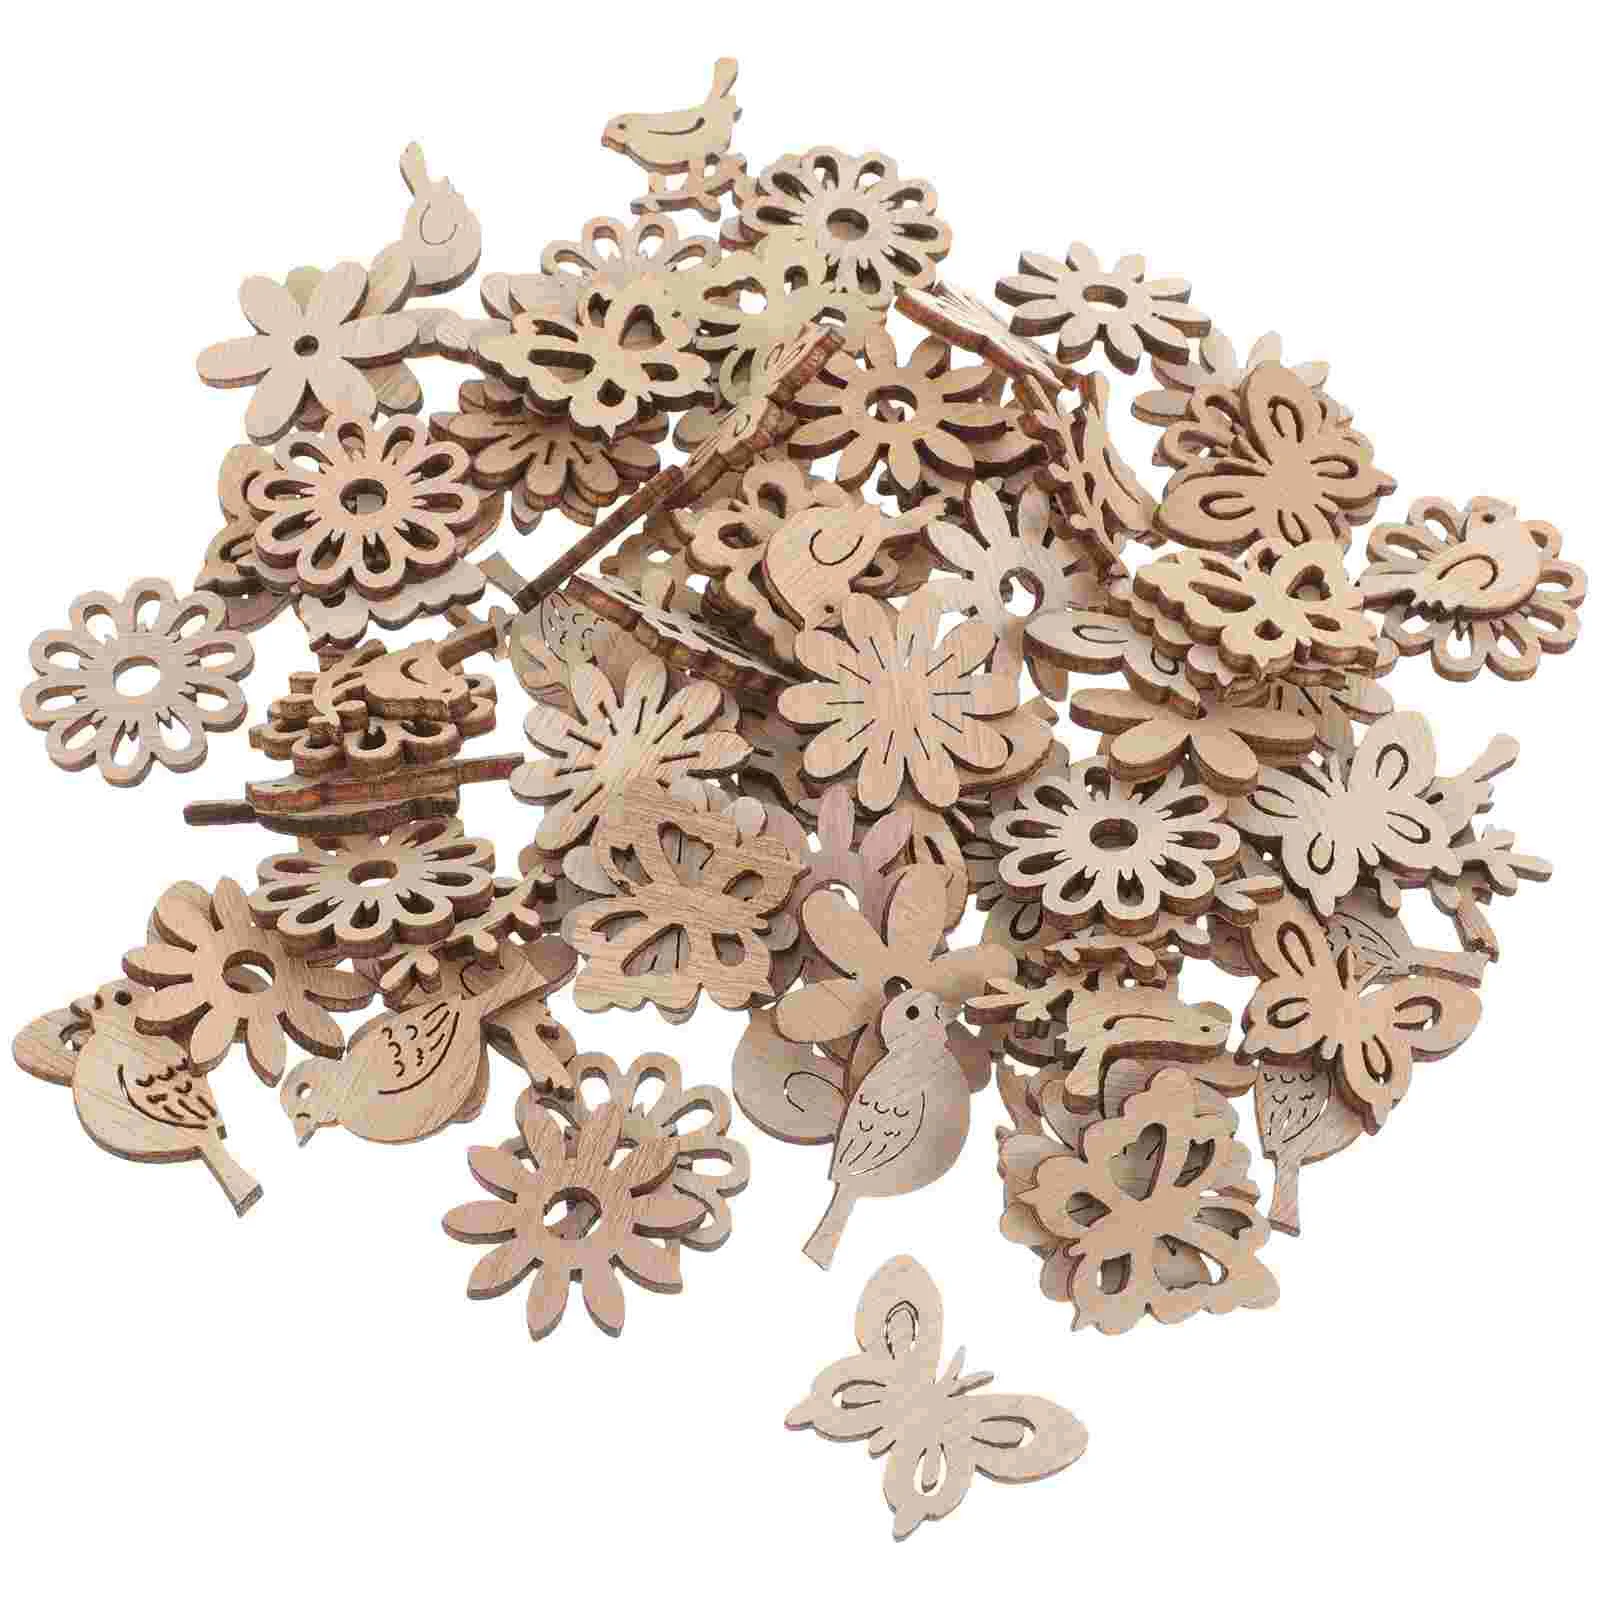 

100pcs Christmas Wooden Ornaments Unfinished Flower Bird Wooden Slice Wood Gift Tags Christmas Tree Embellishments Cutouts